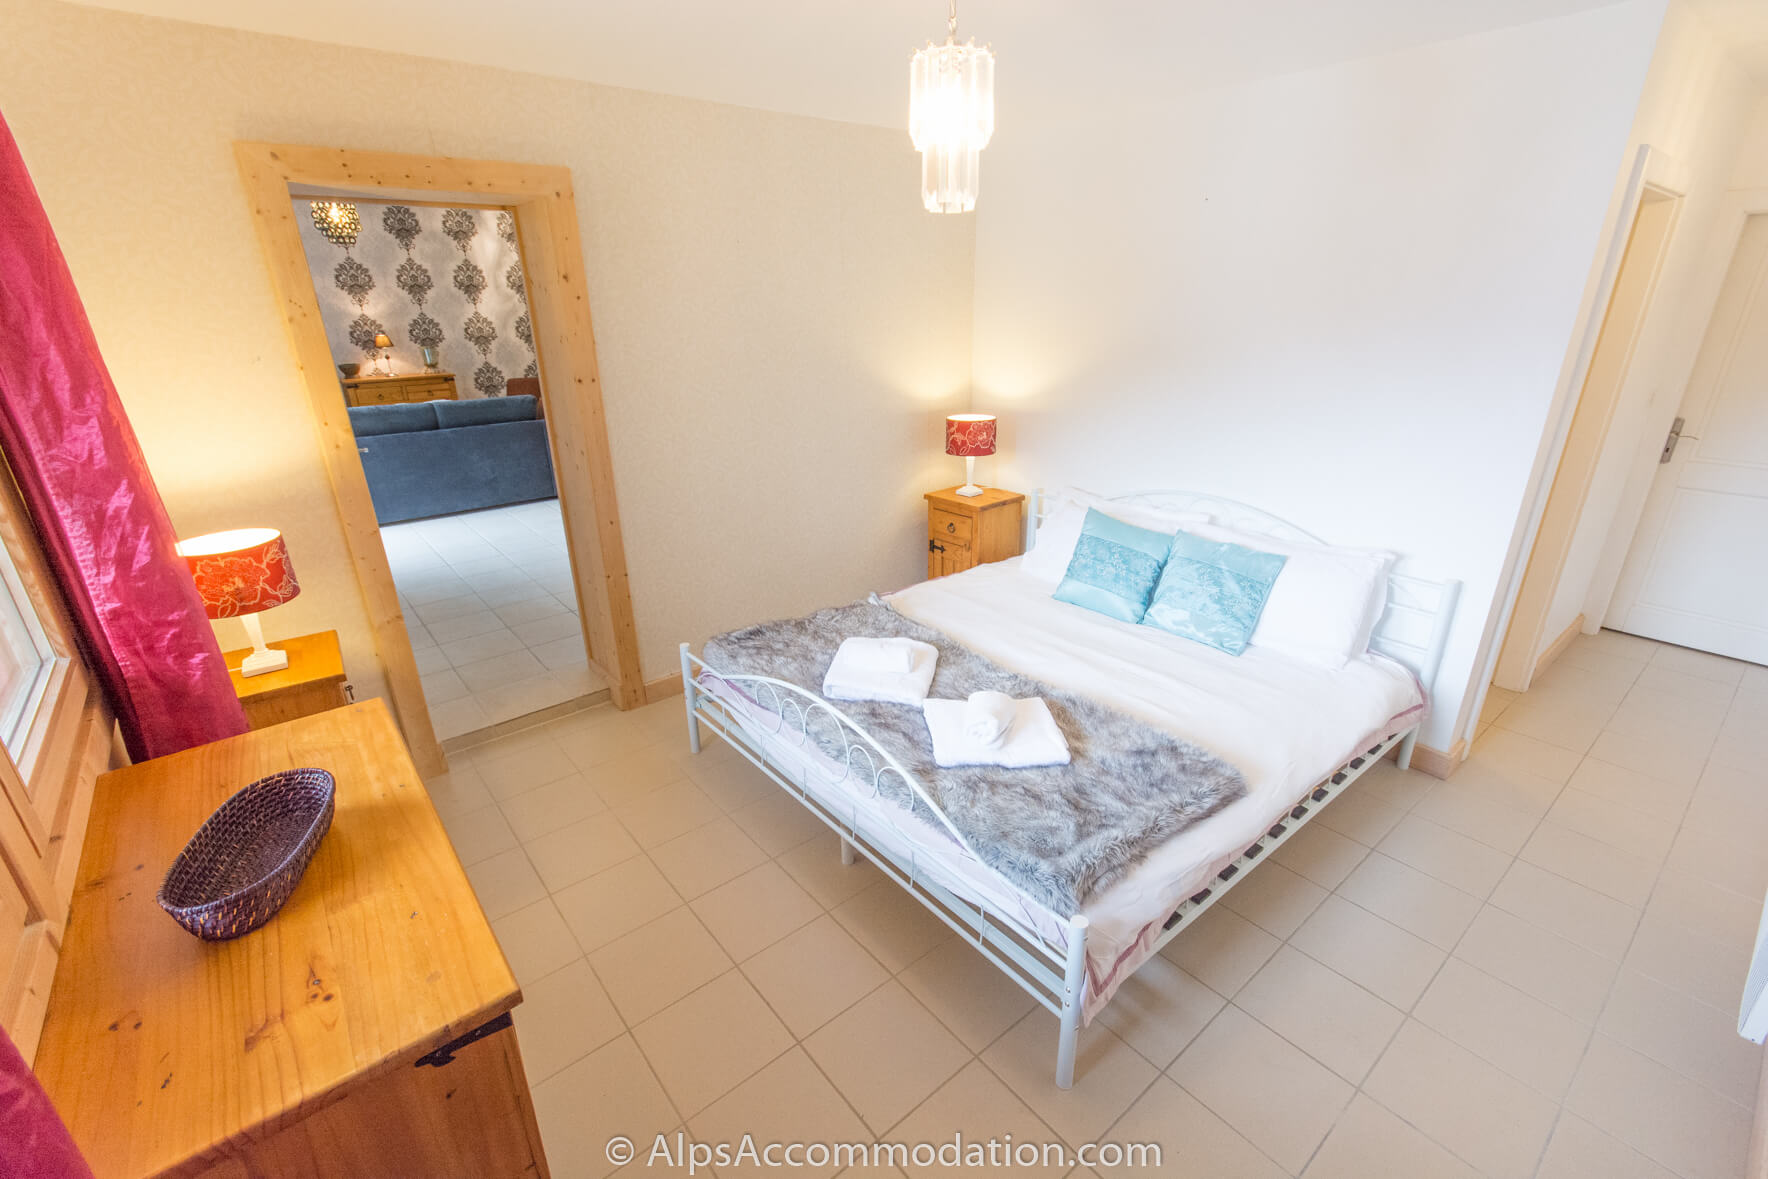 Chalet Falcon Samoëns - The ground floor apartment provides an additional ensuite bedroom